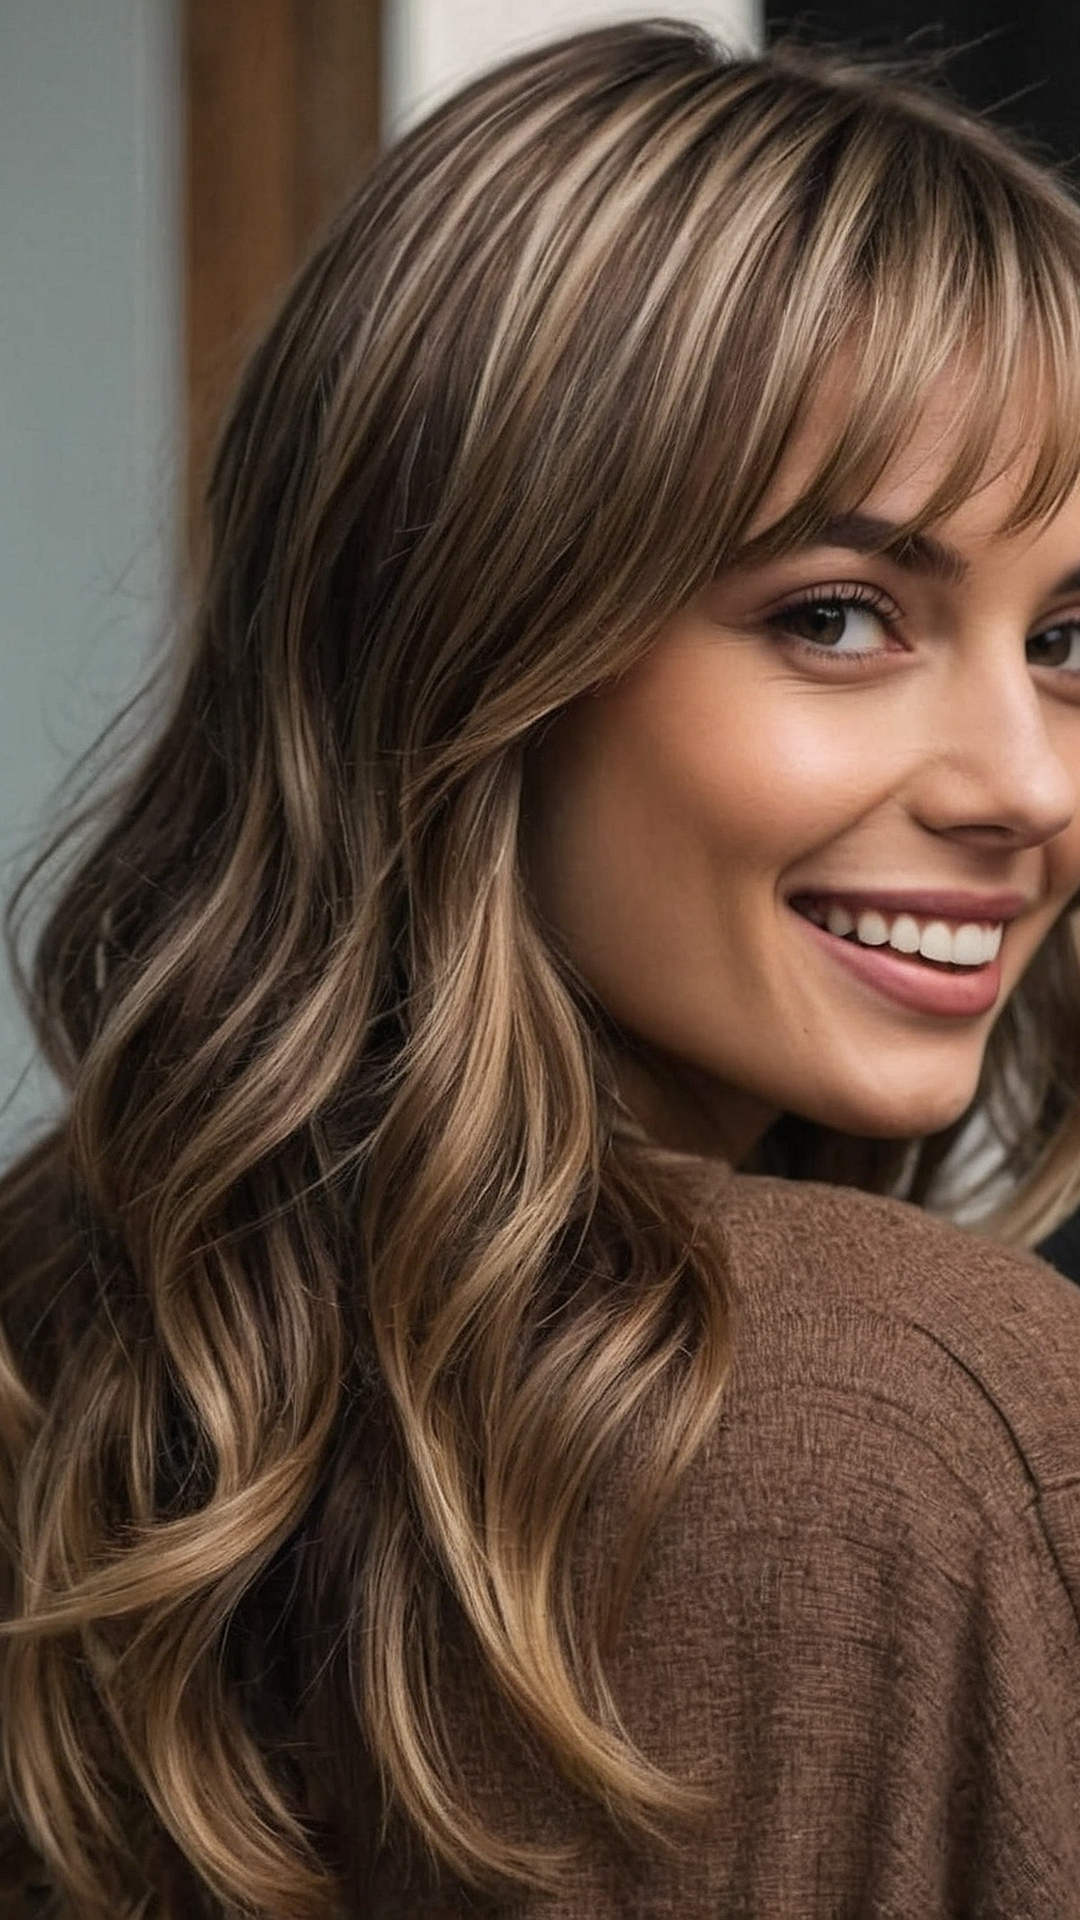 Embrace Your Fine Hair: Stylish Cuts